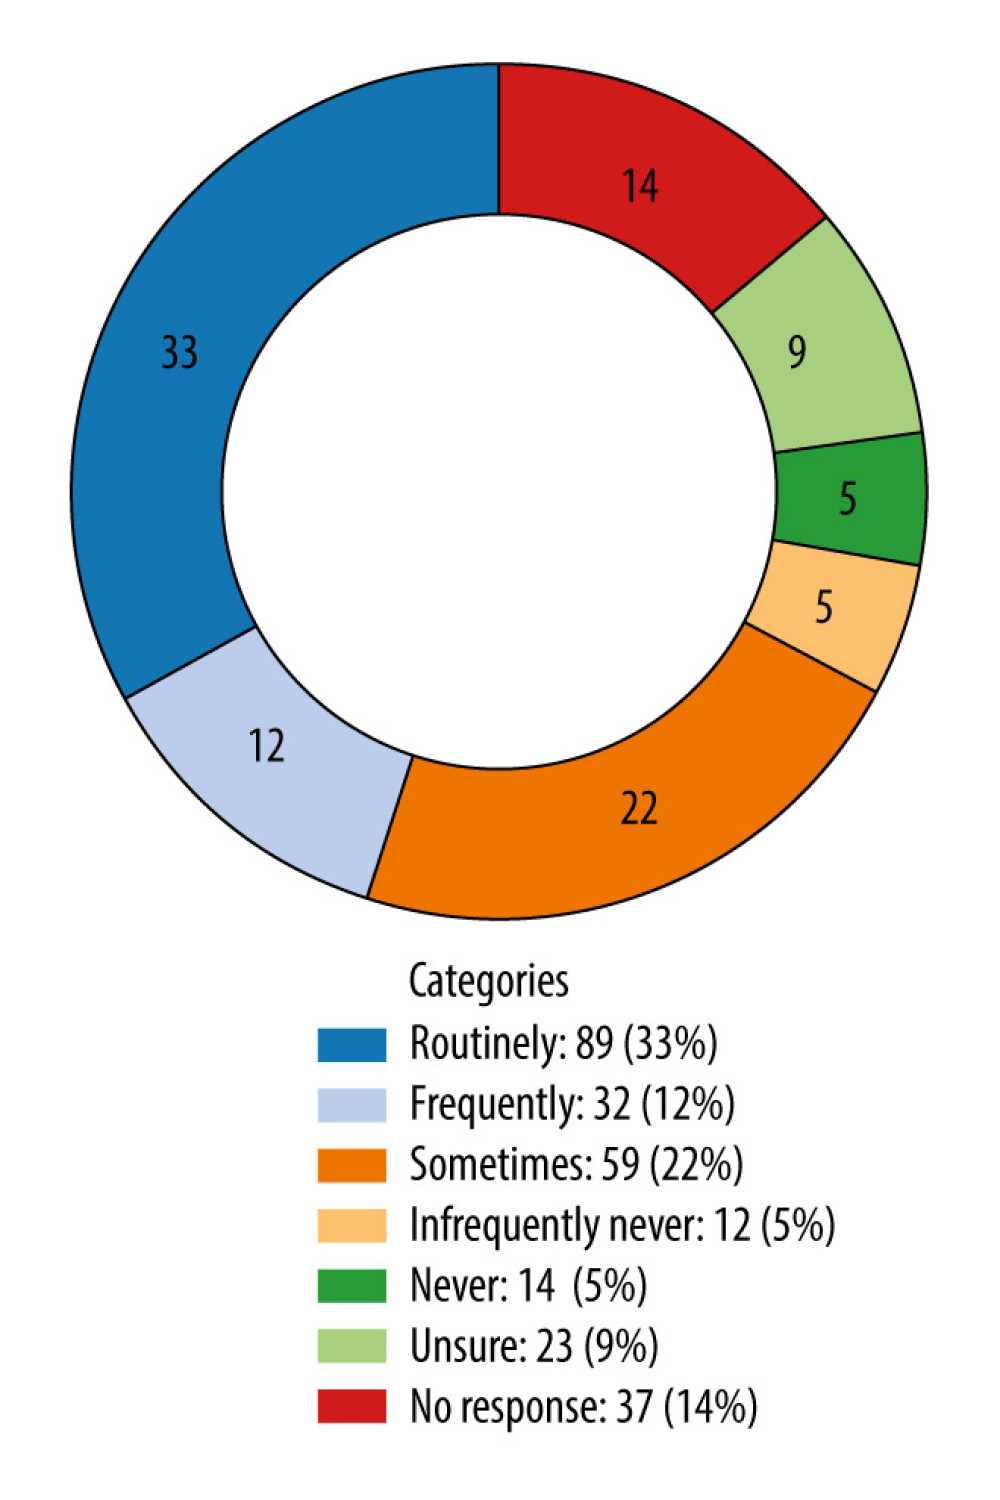 Donut chart visualizing the sedation vacation practice or protocols in the pediatric intensive care unit, with labels indicating both the count and the percentage for each category.